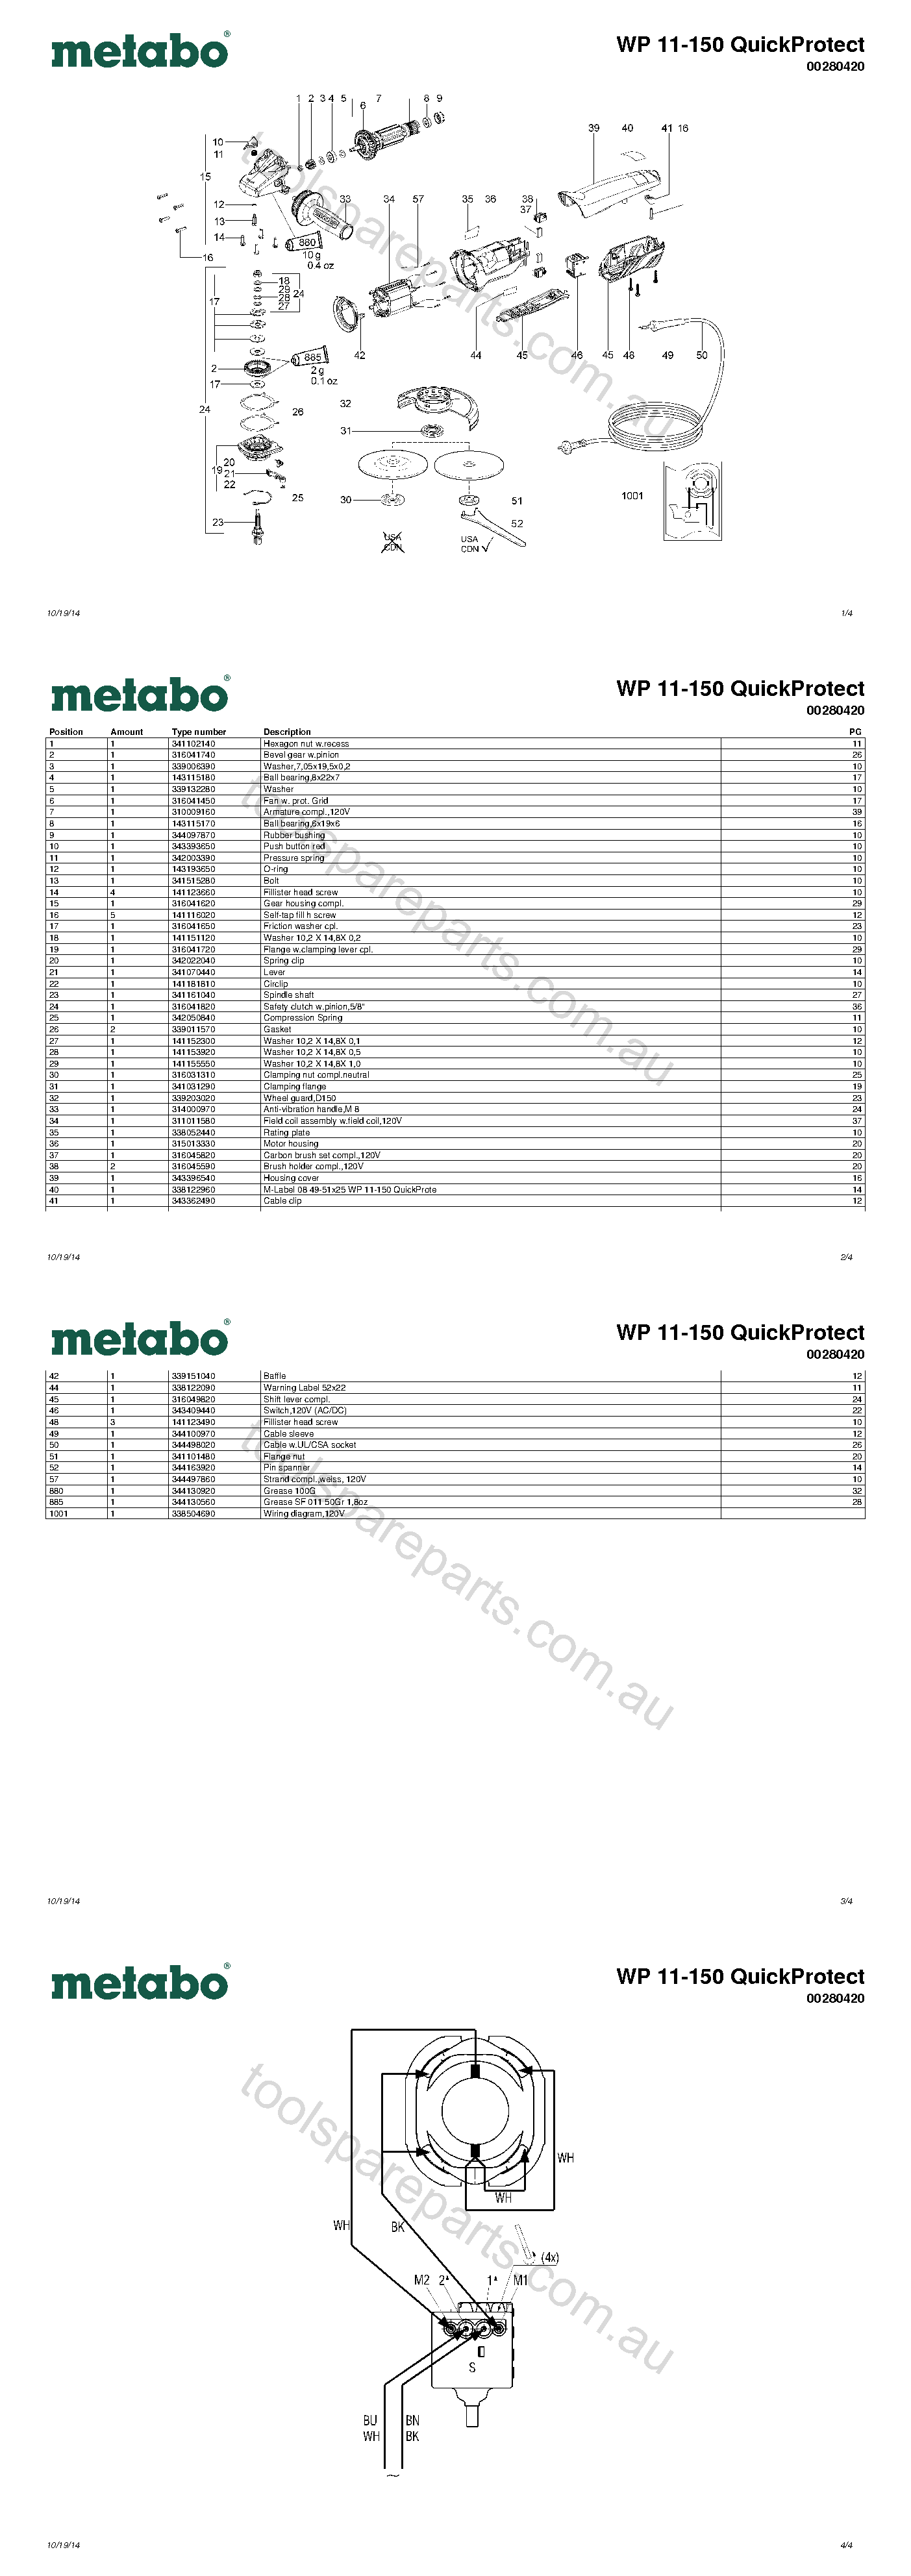 Metabo WP 11-150 QuickProtect 00280420  Diagram 1